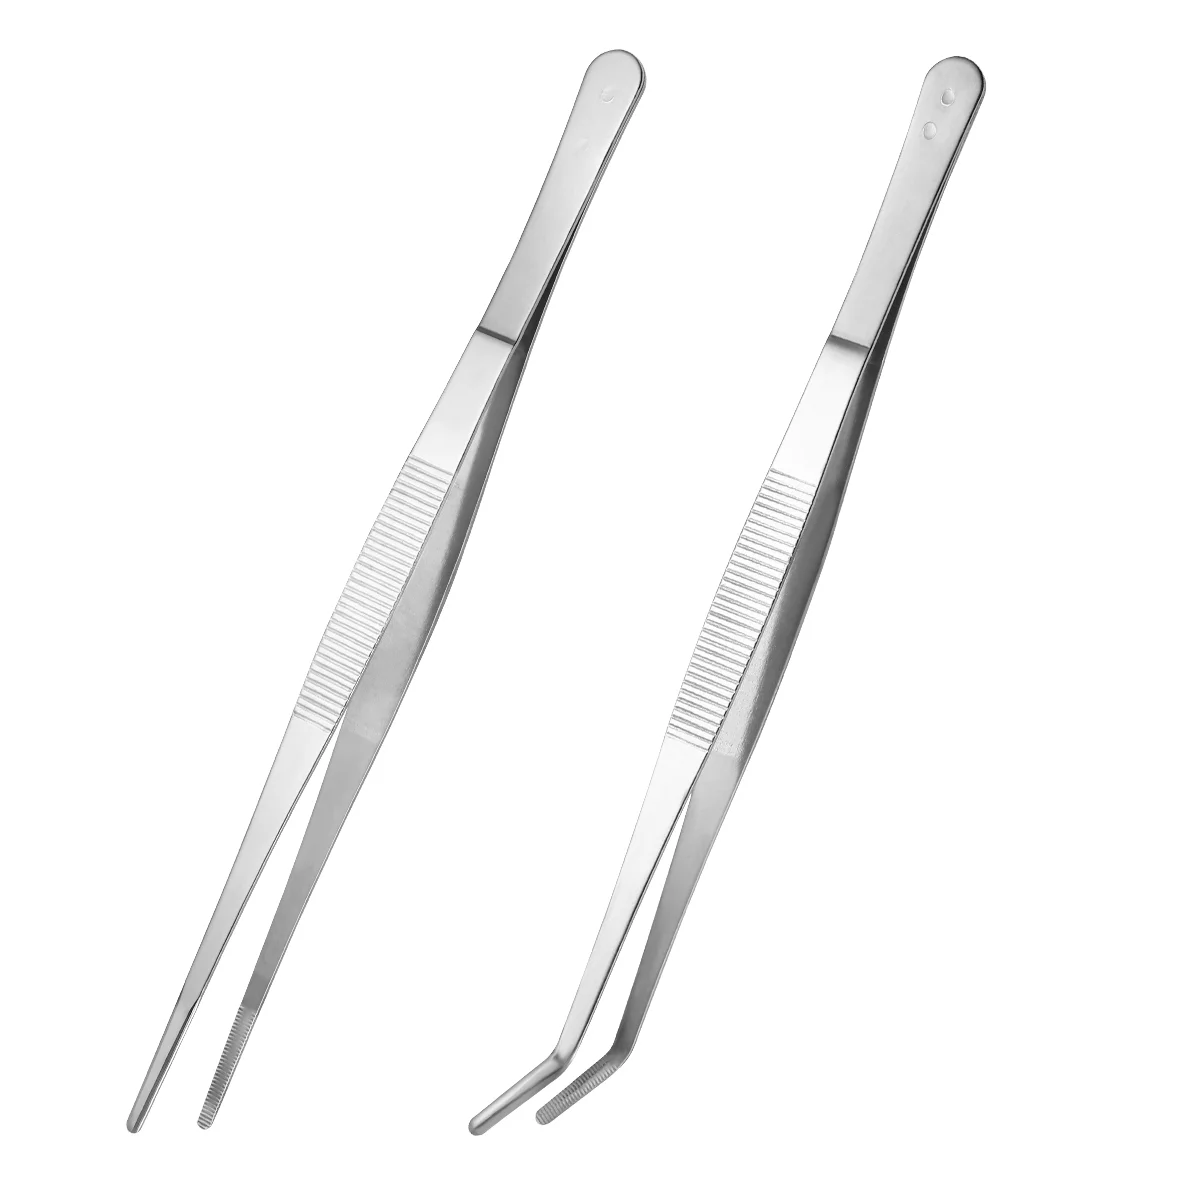 

VORCOOL 2pcs Stainless Steel Straight and Curved Nippers Tweezers Feeding Tongs for Reptile Snakes Lizards Spider (Silver)